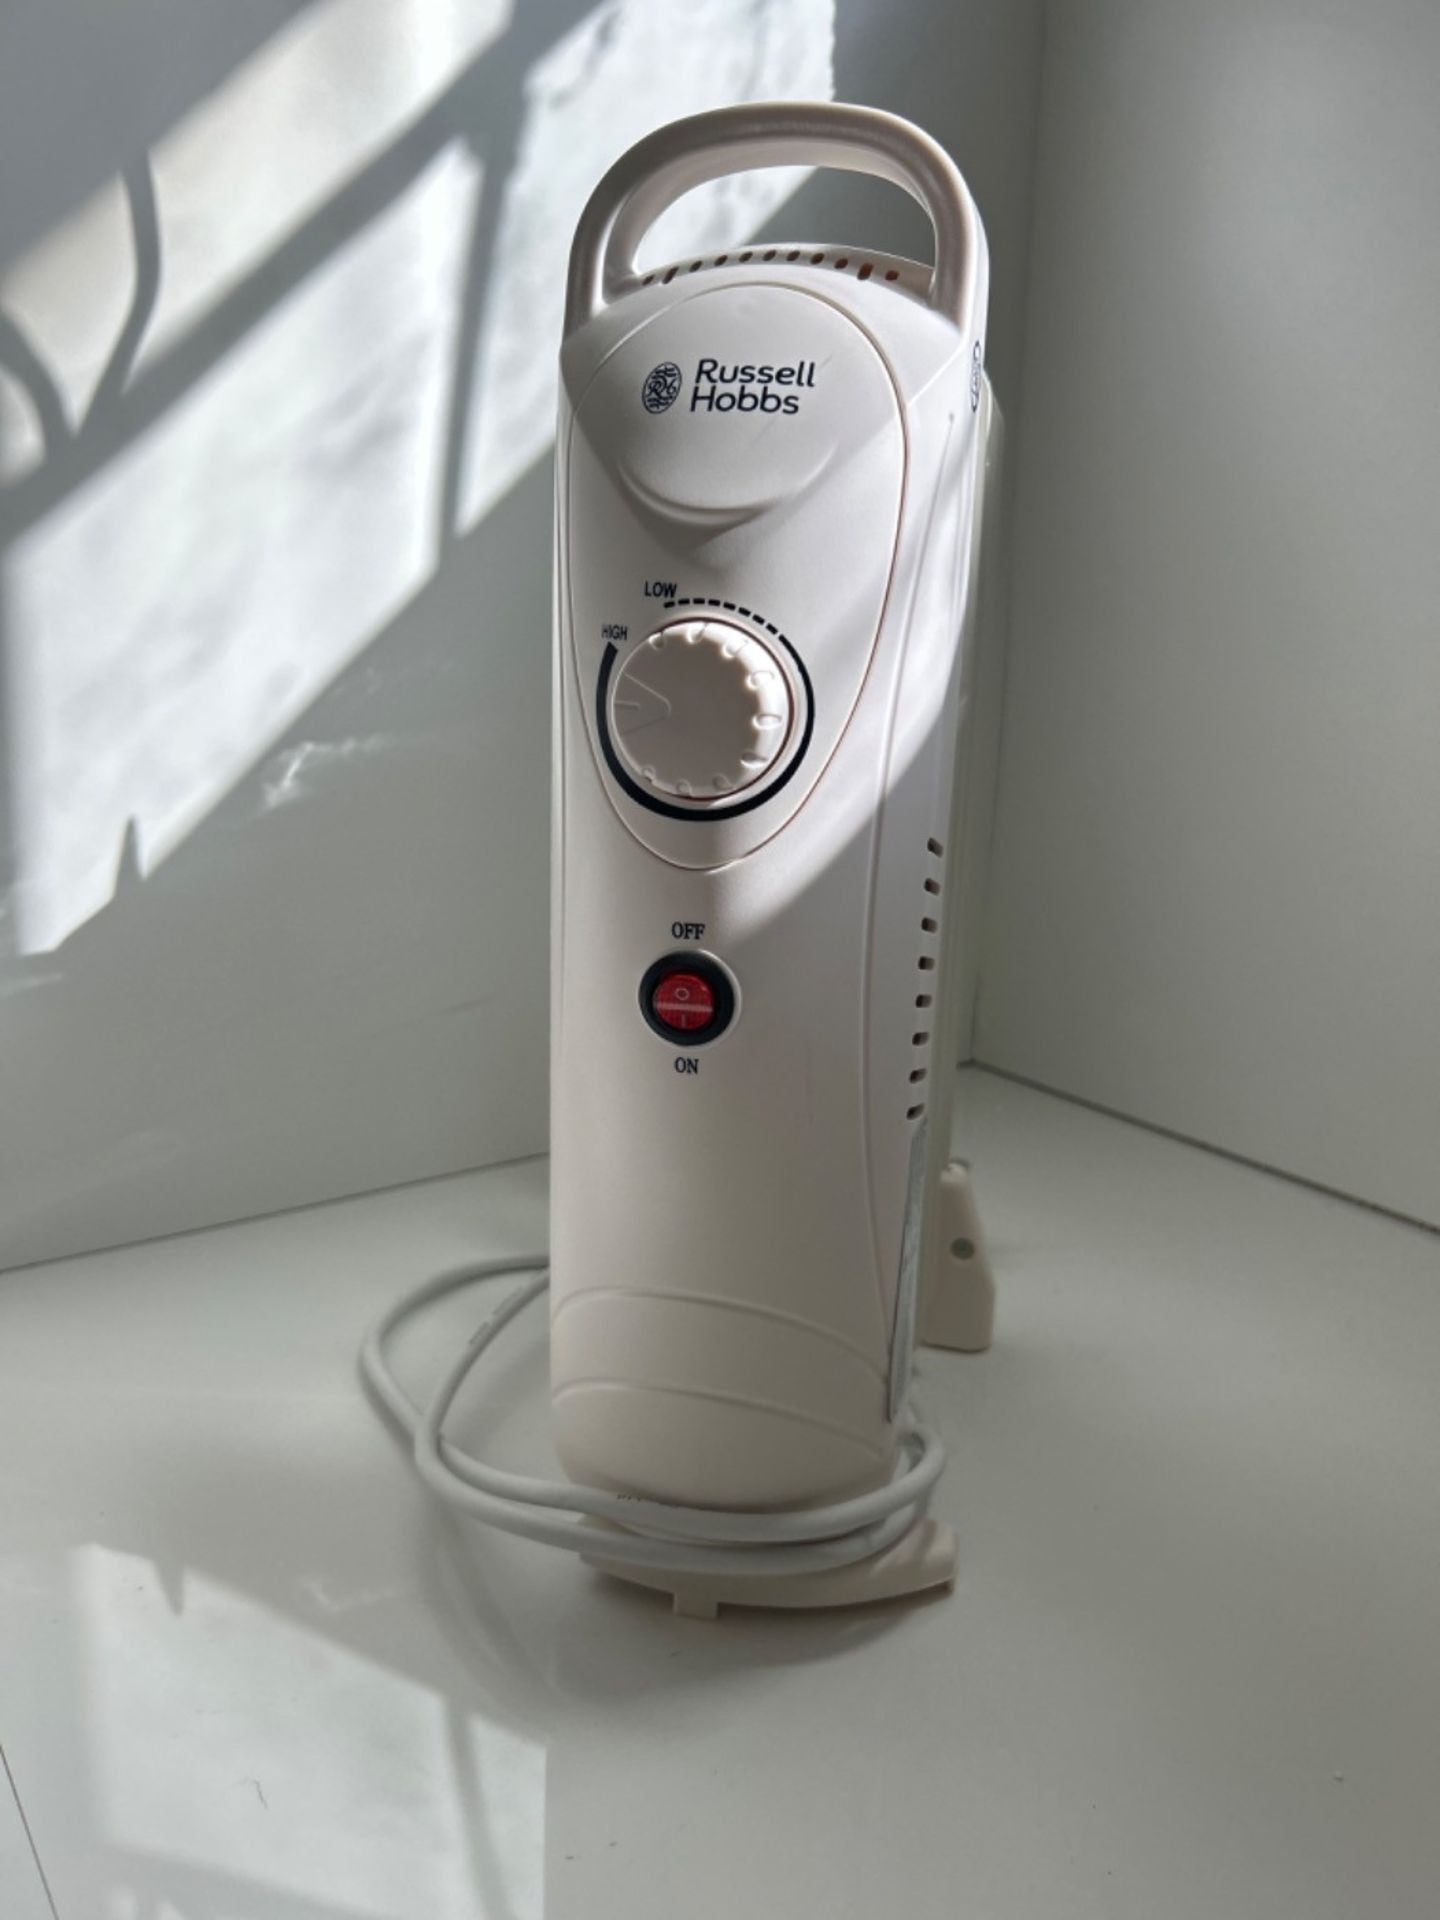 Russell Hobbs 650W Oil Filled Radiator, 5 Fin Portable Electric Heater - White, Adjustable Thermo... - Image 3 of 3